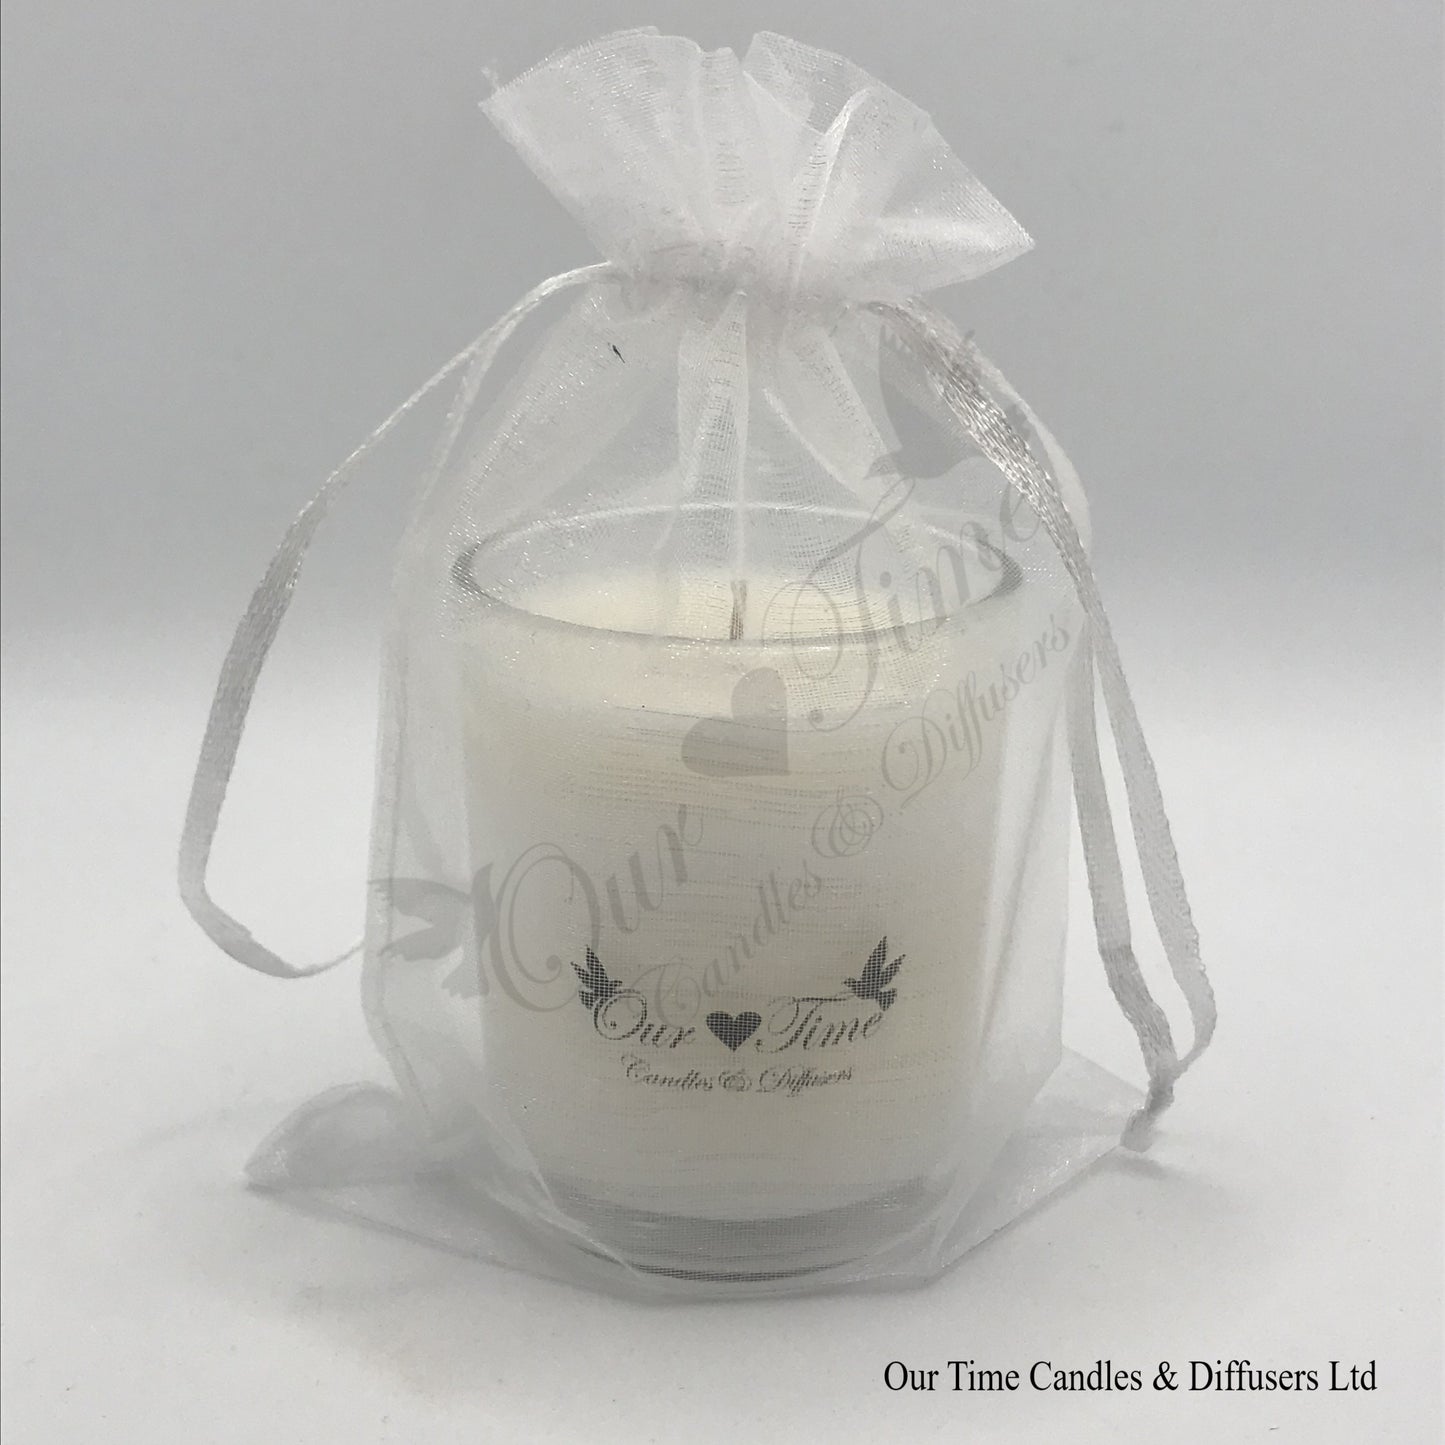 Wedding Favour Candle in organza bag from Our Time Candles and Diffusers